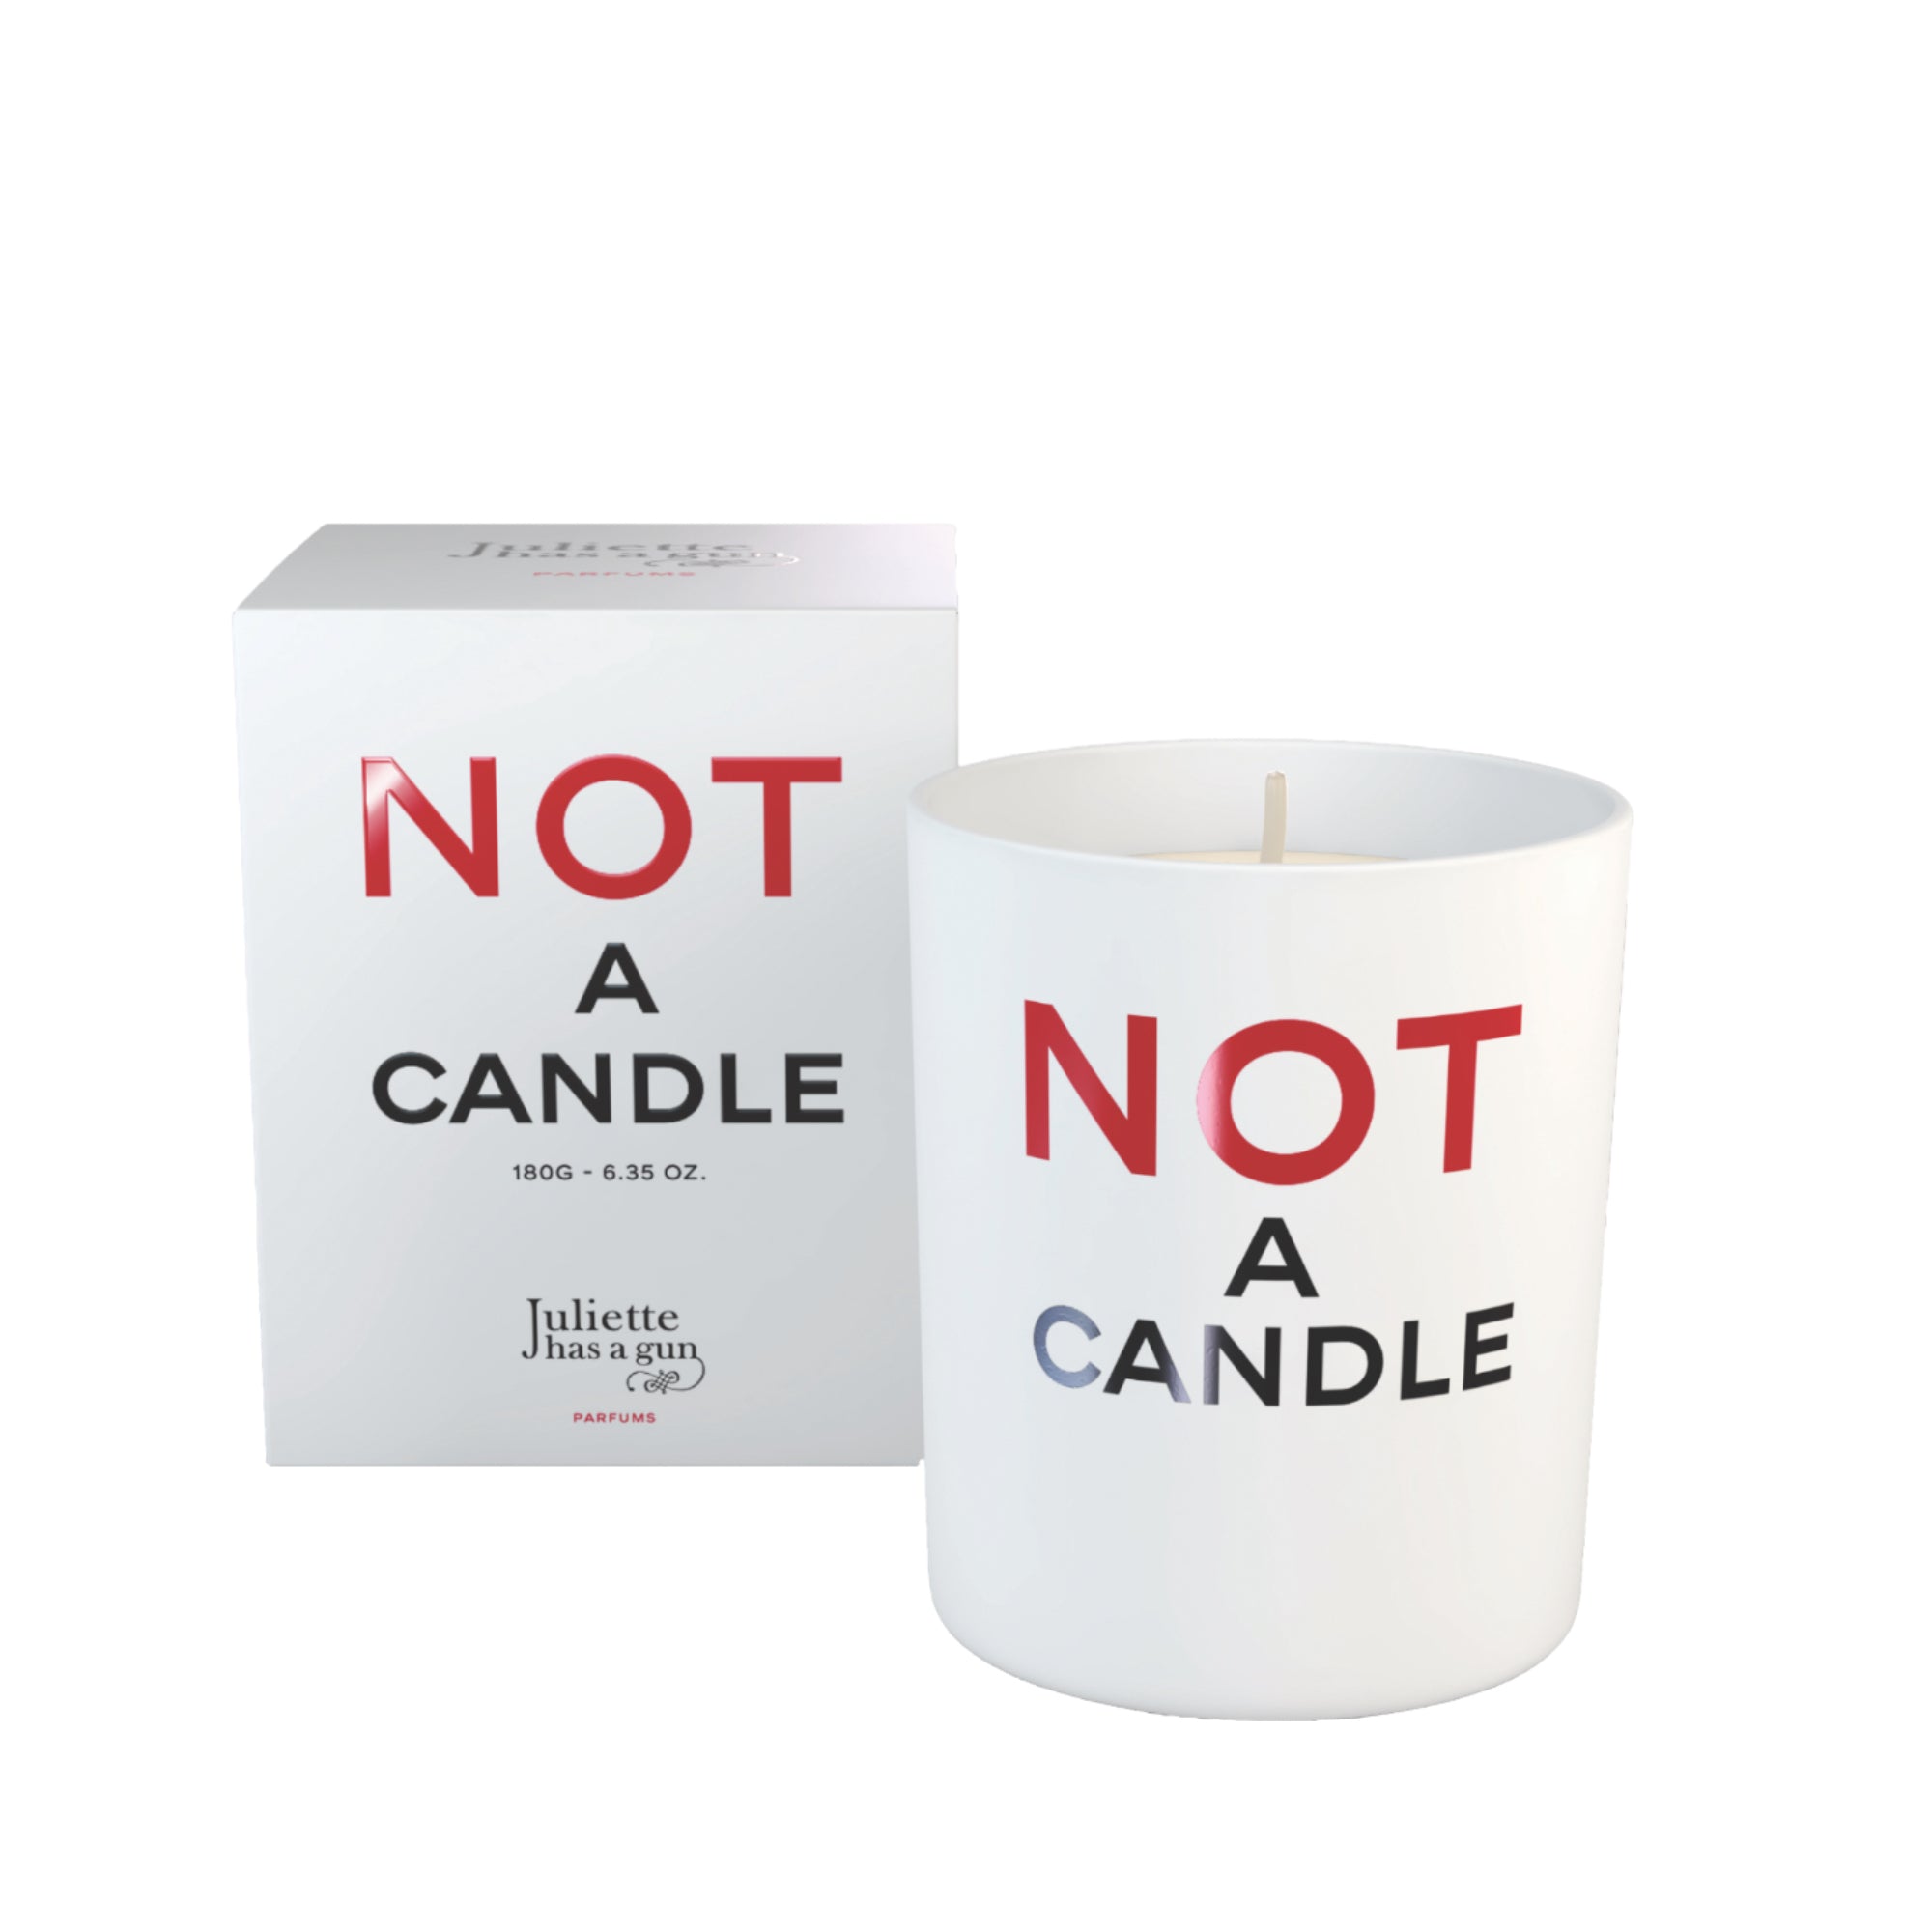 Not A Candle